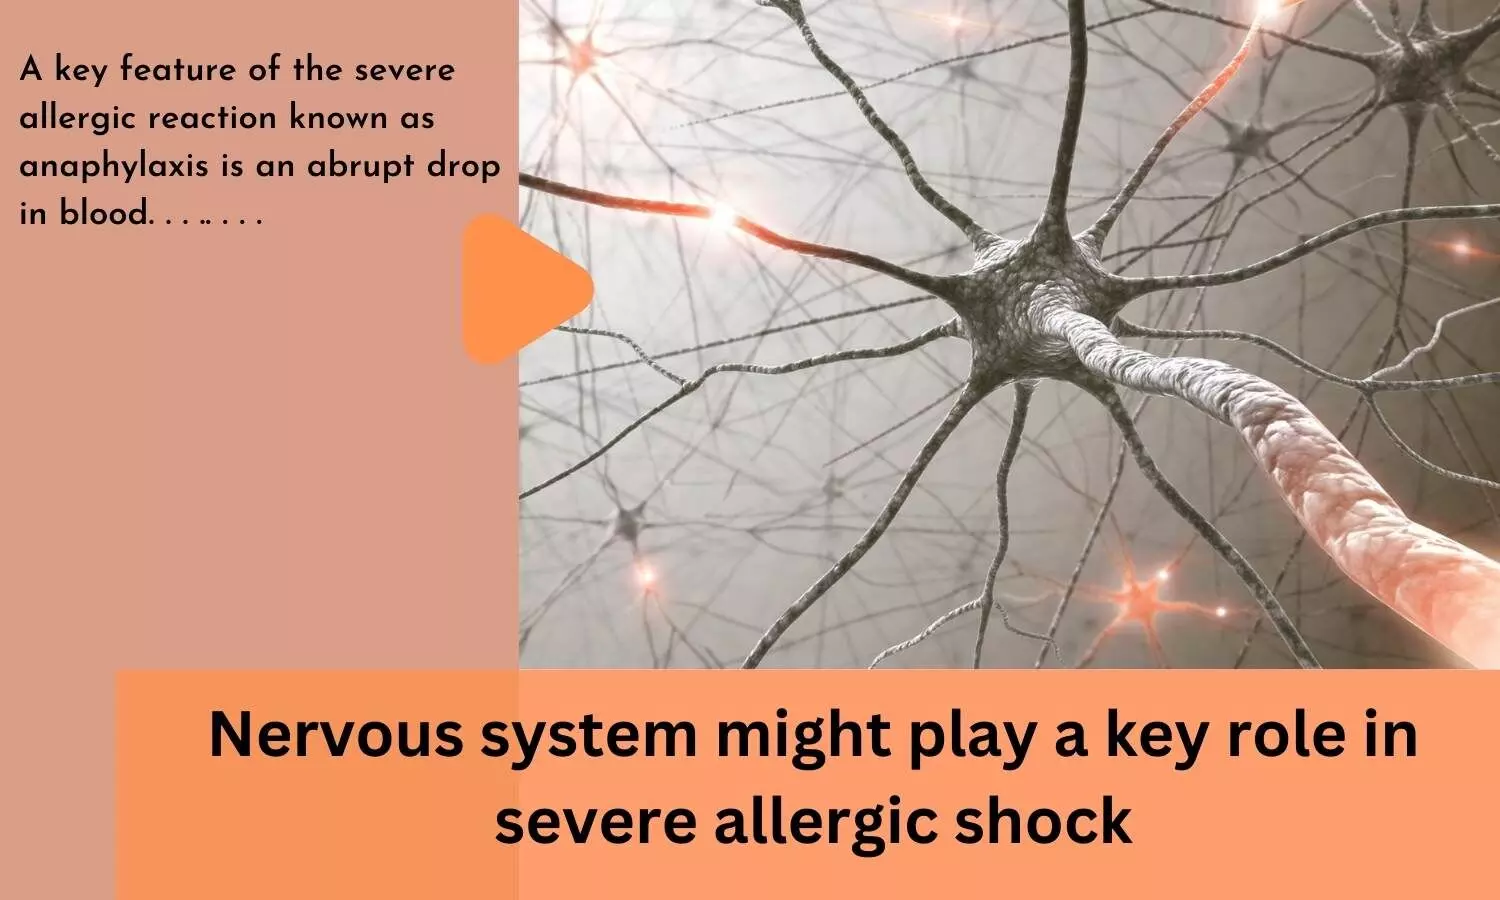 Nervous system might play a key role in severe allergic shock